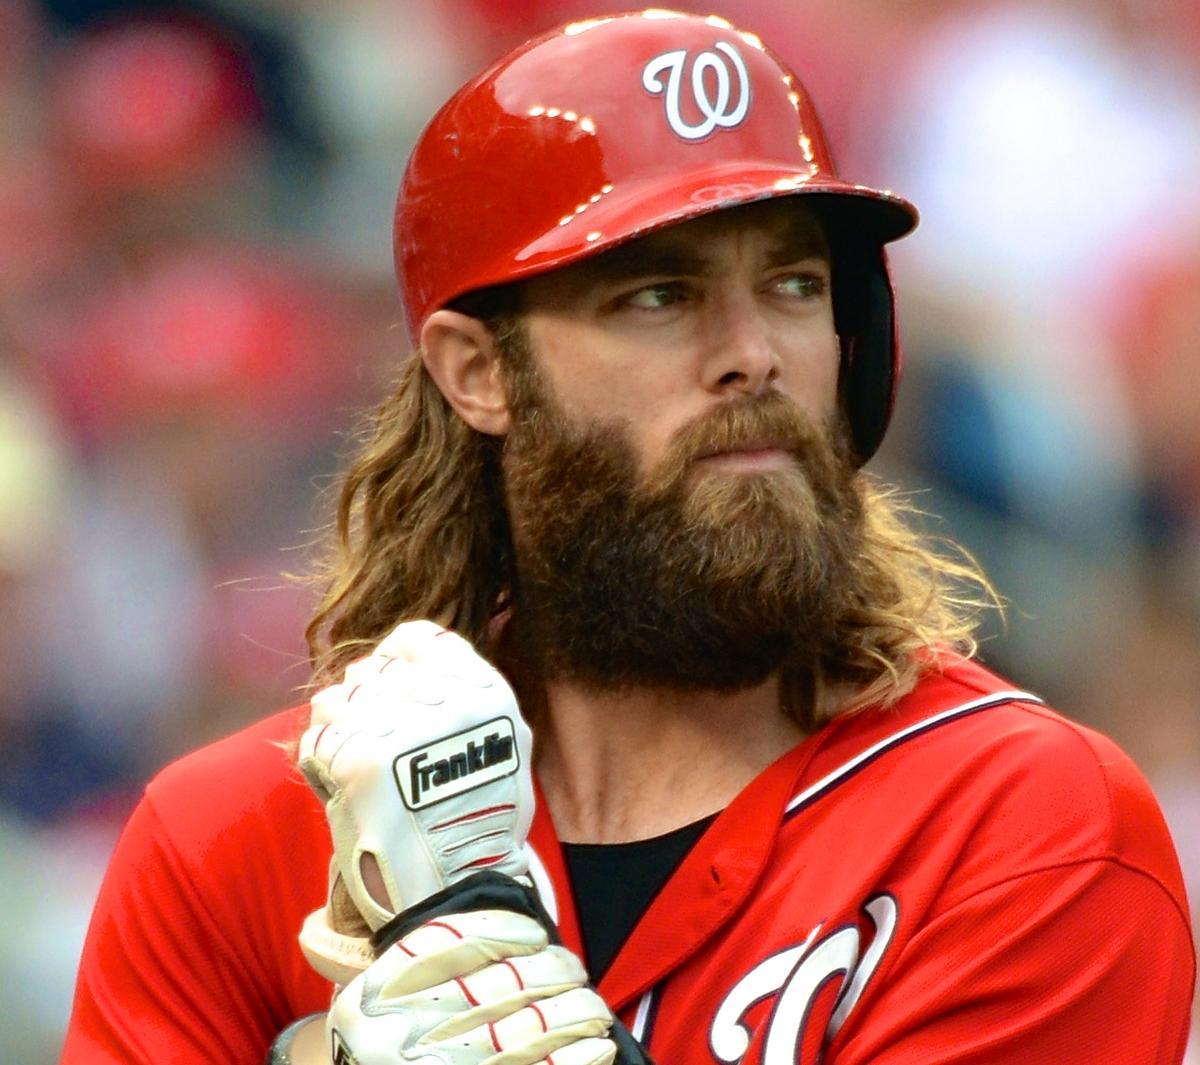 Jayson Werth rails against 'super nerds' that are 'killing the